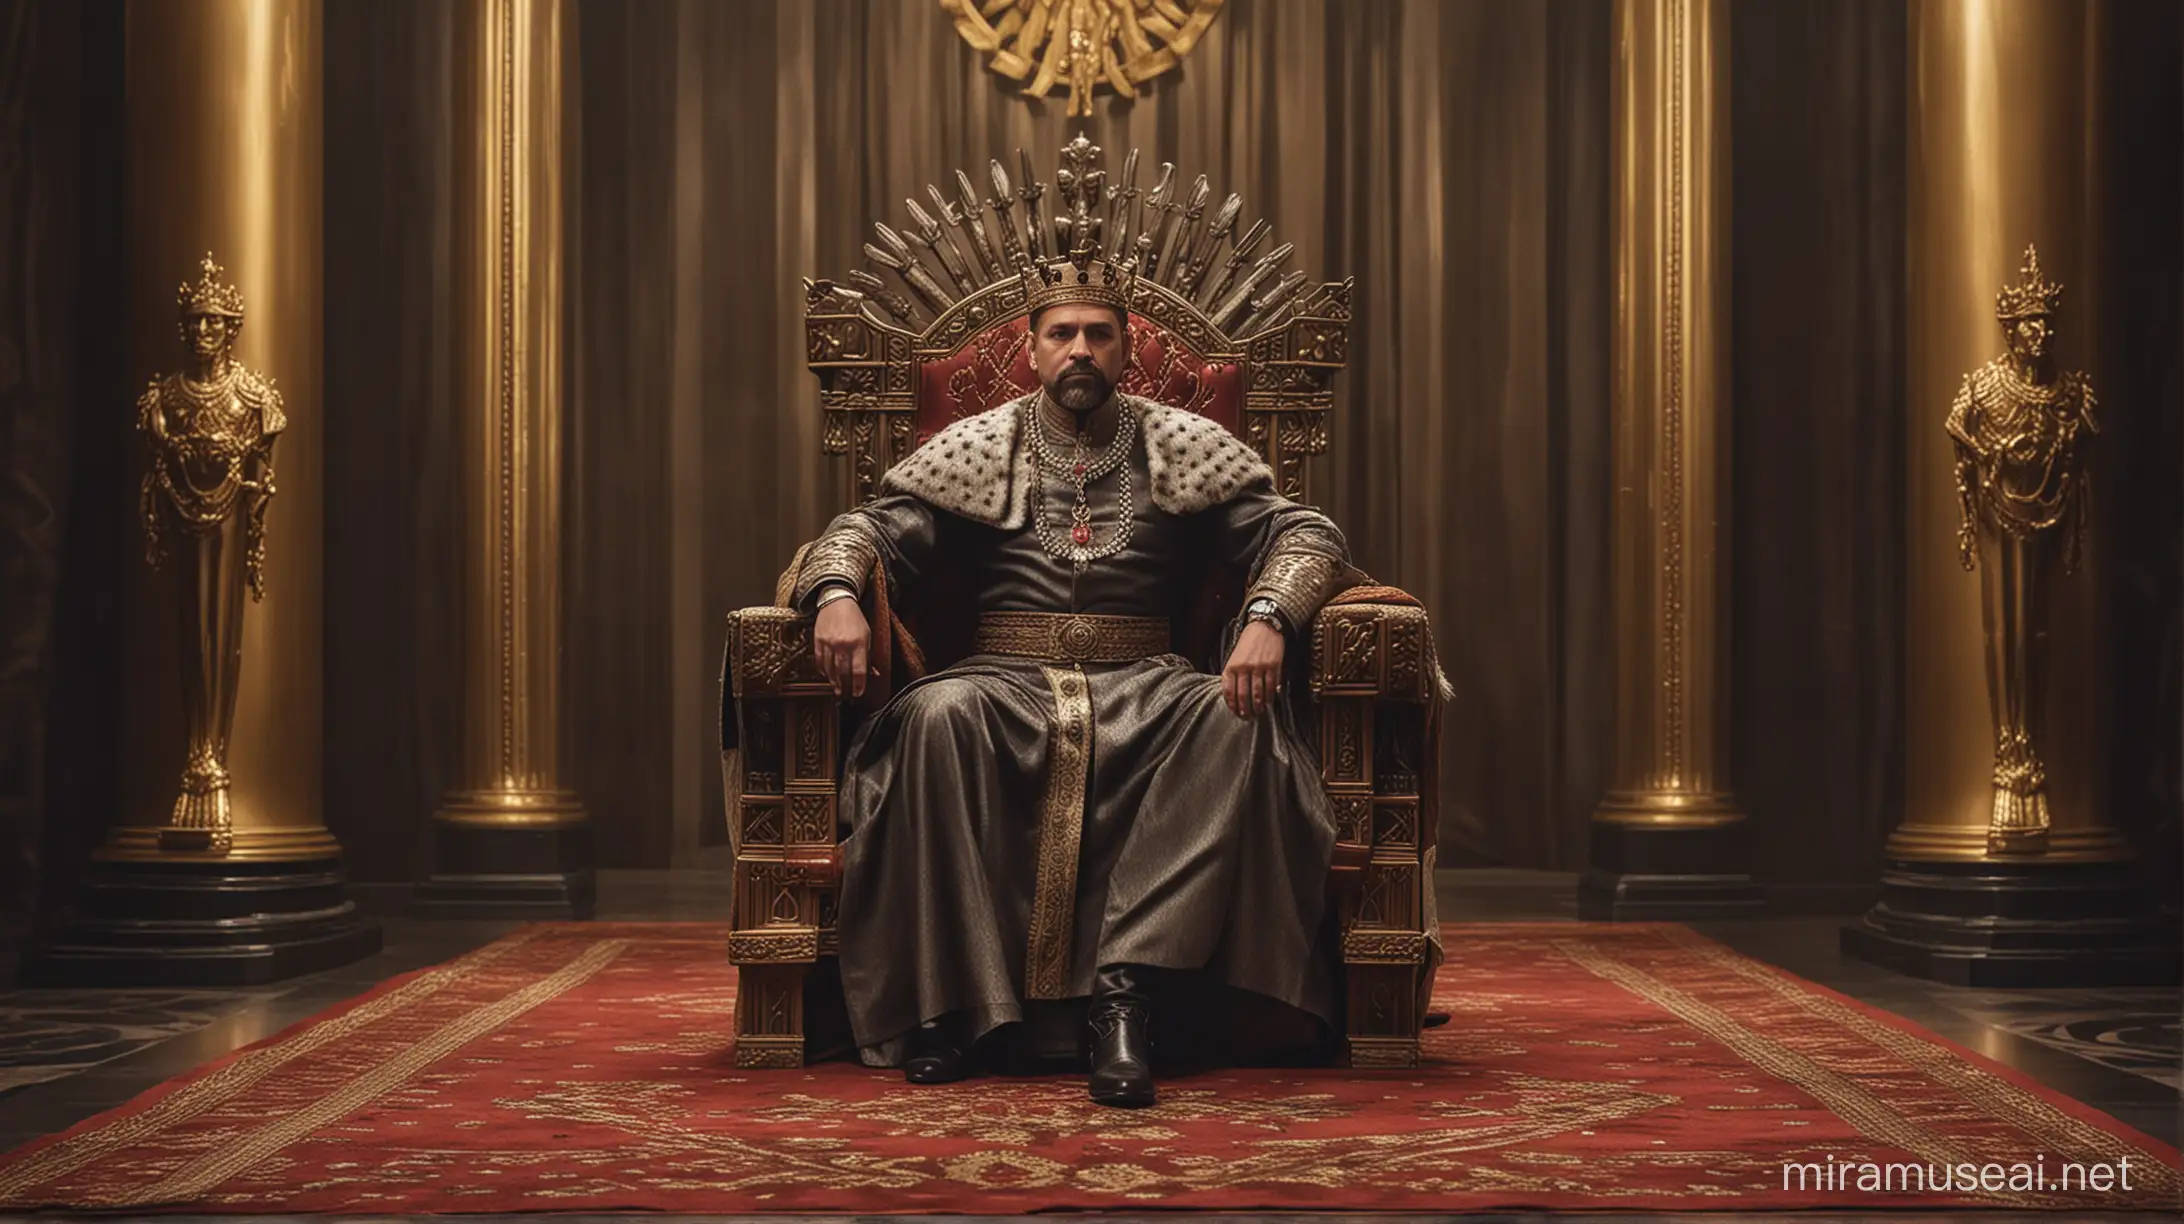 Modern King Seated on Majestic Throne